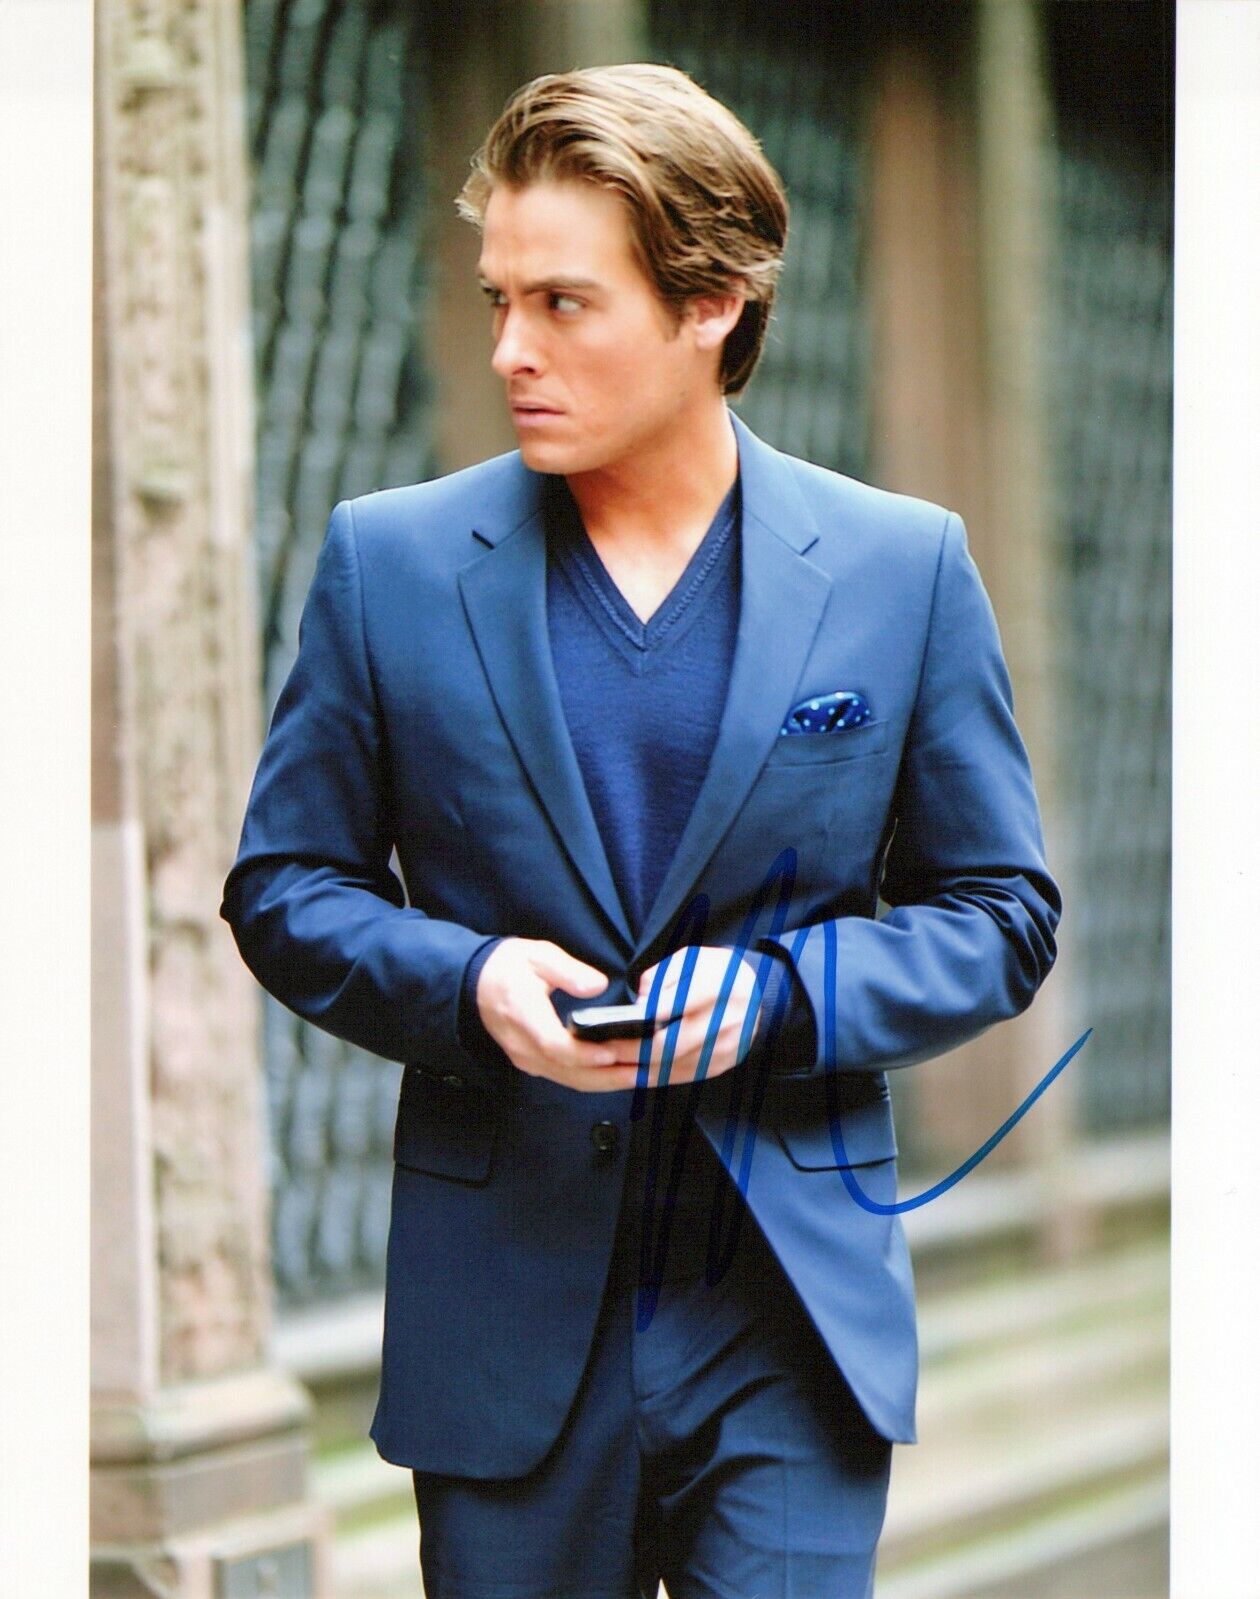 Kevin Zegers head shot autographed Photo Poster painting signed 8x10 #1